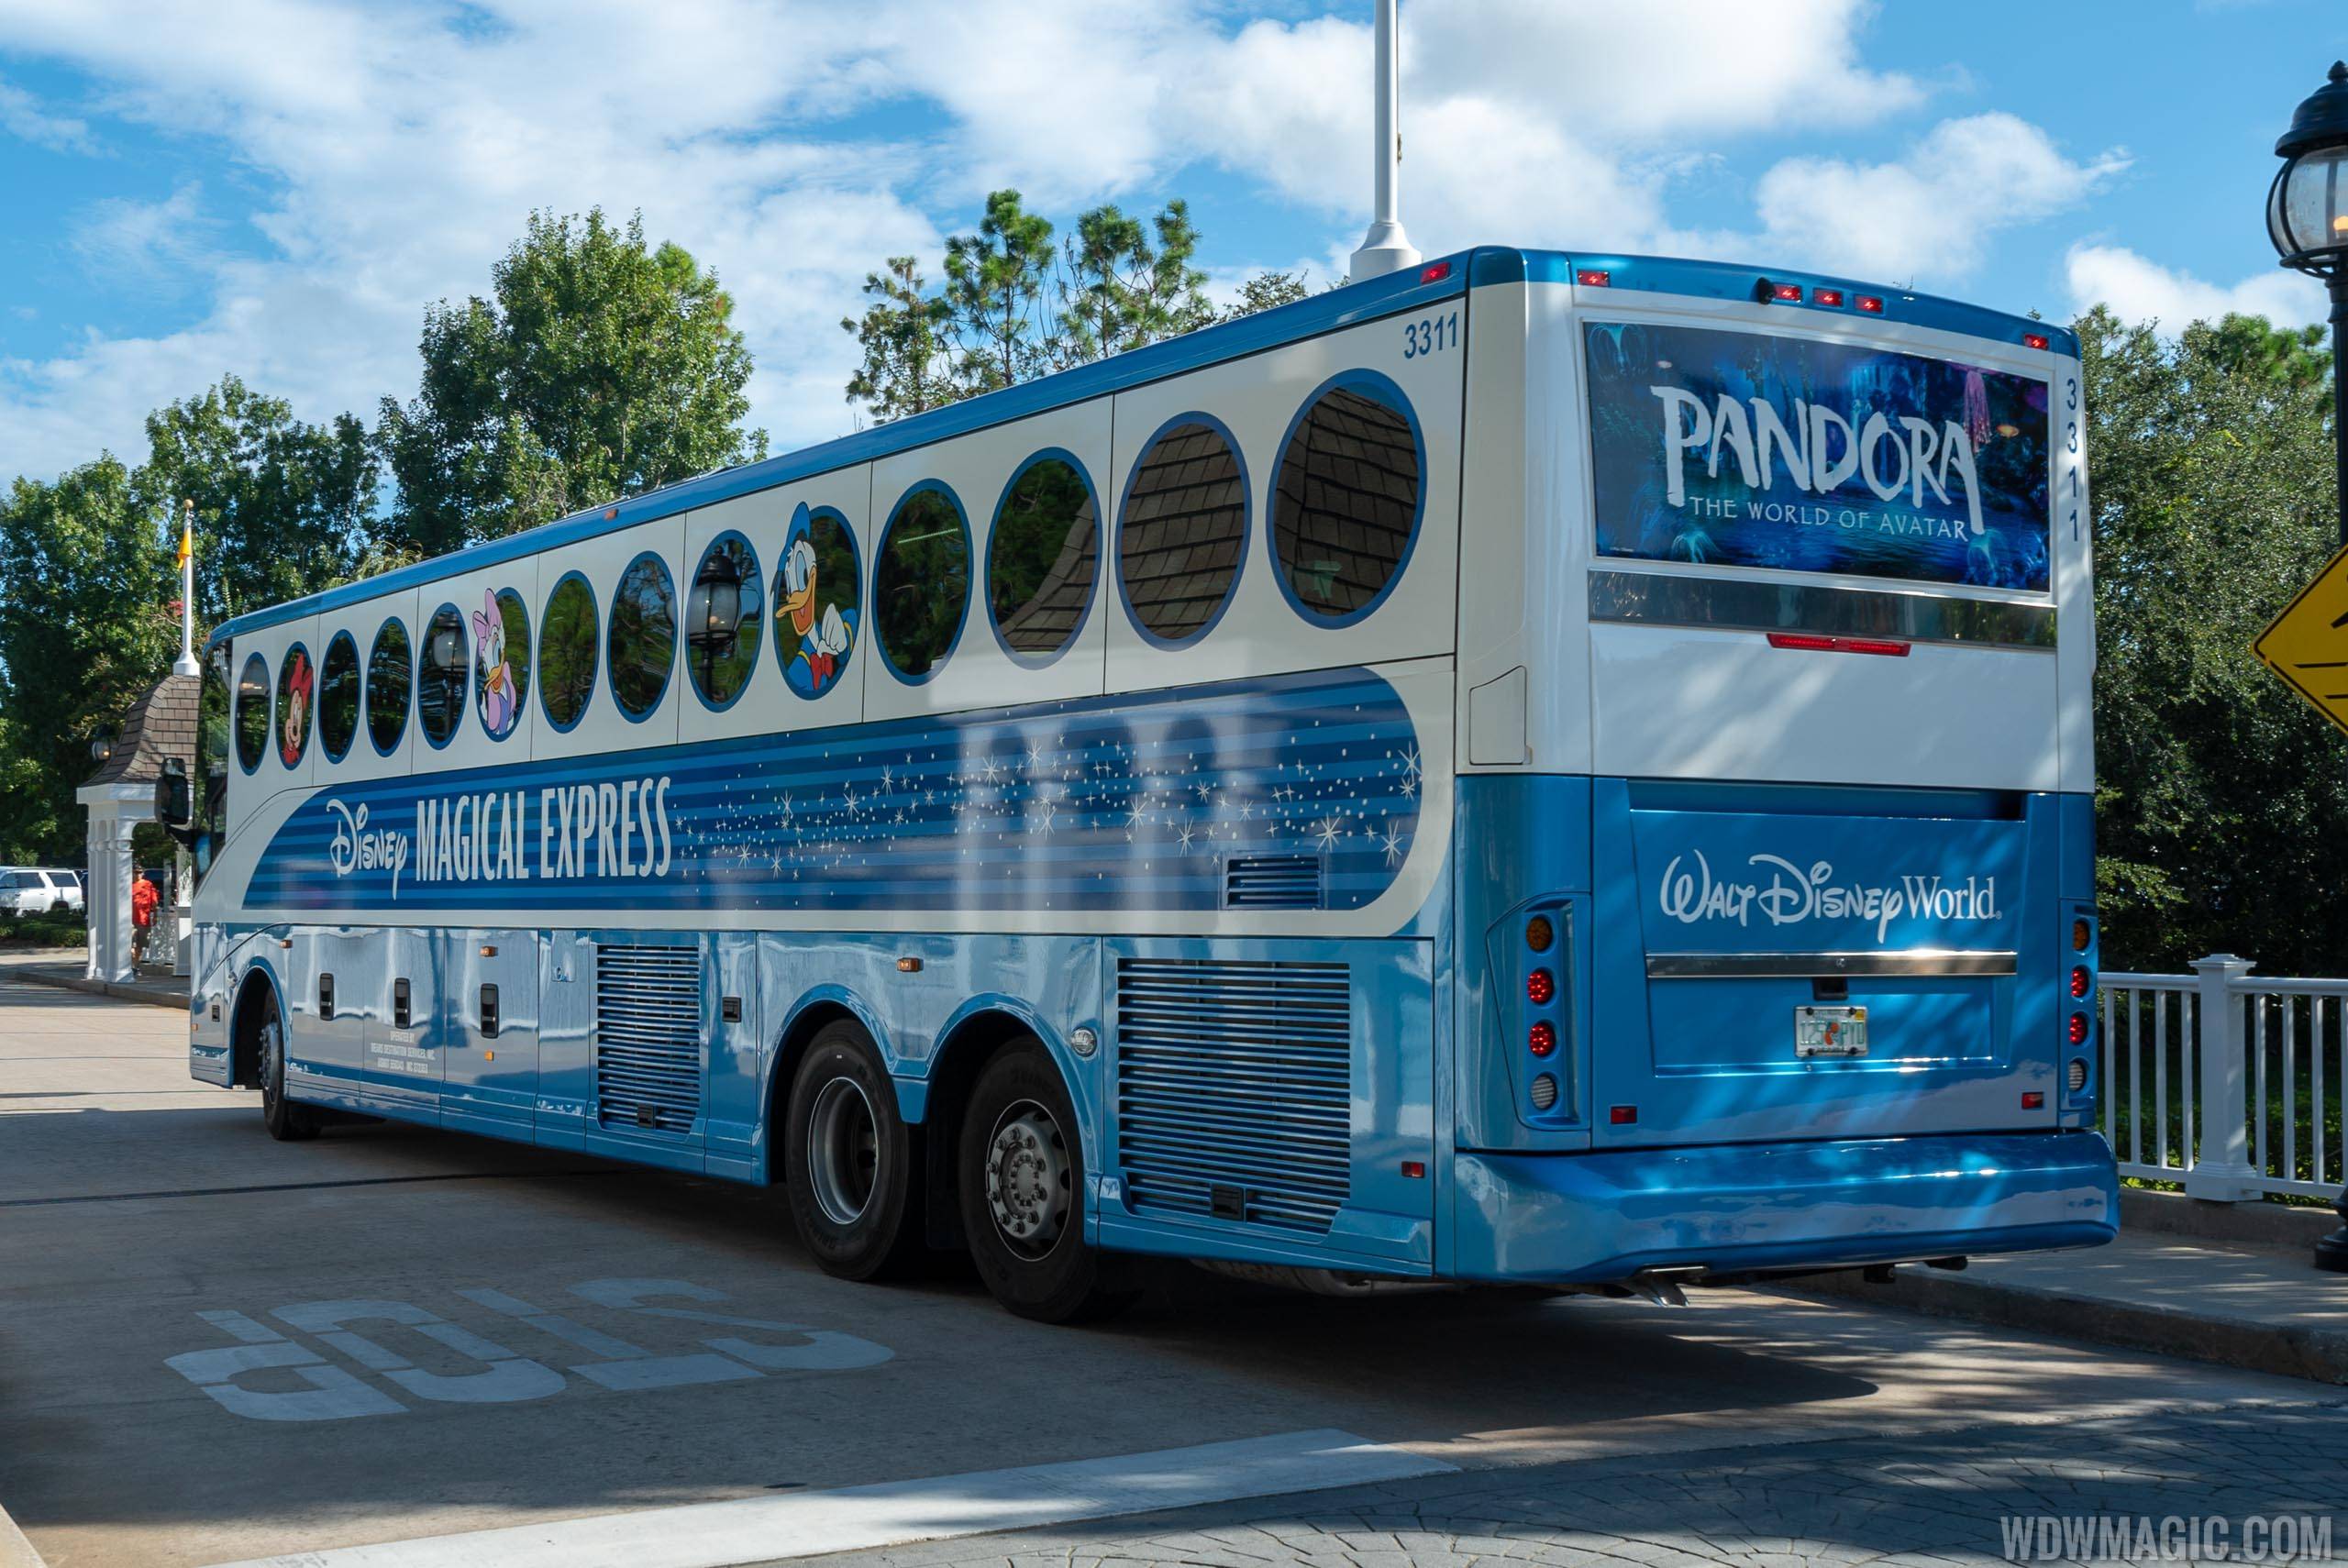 Disney magical Express will end this year